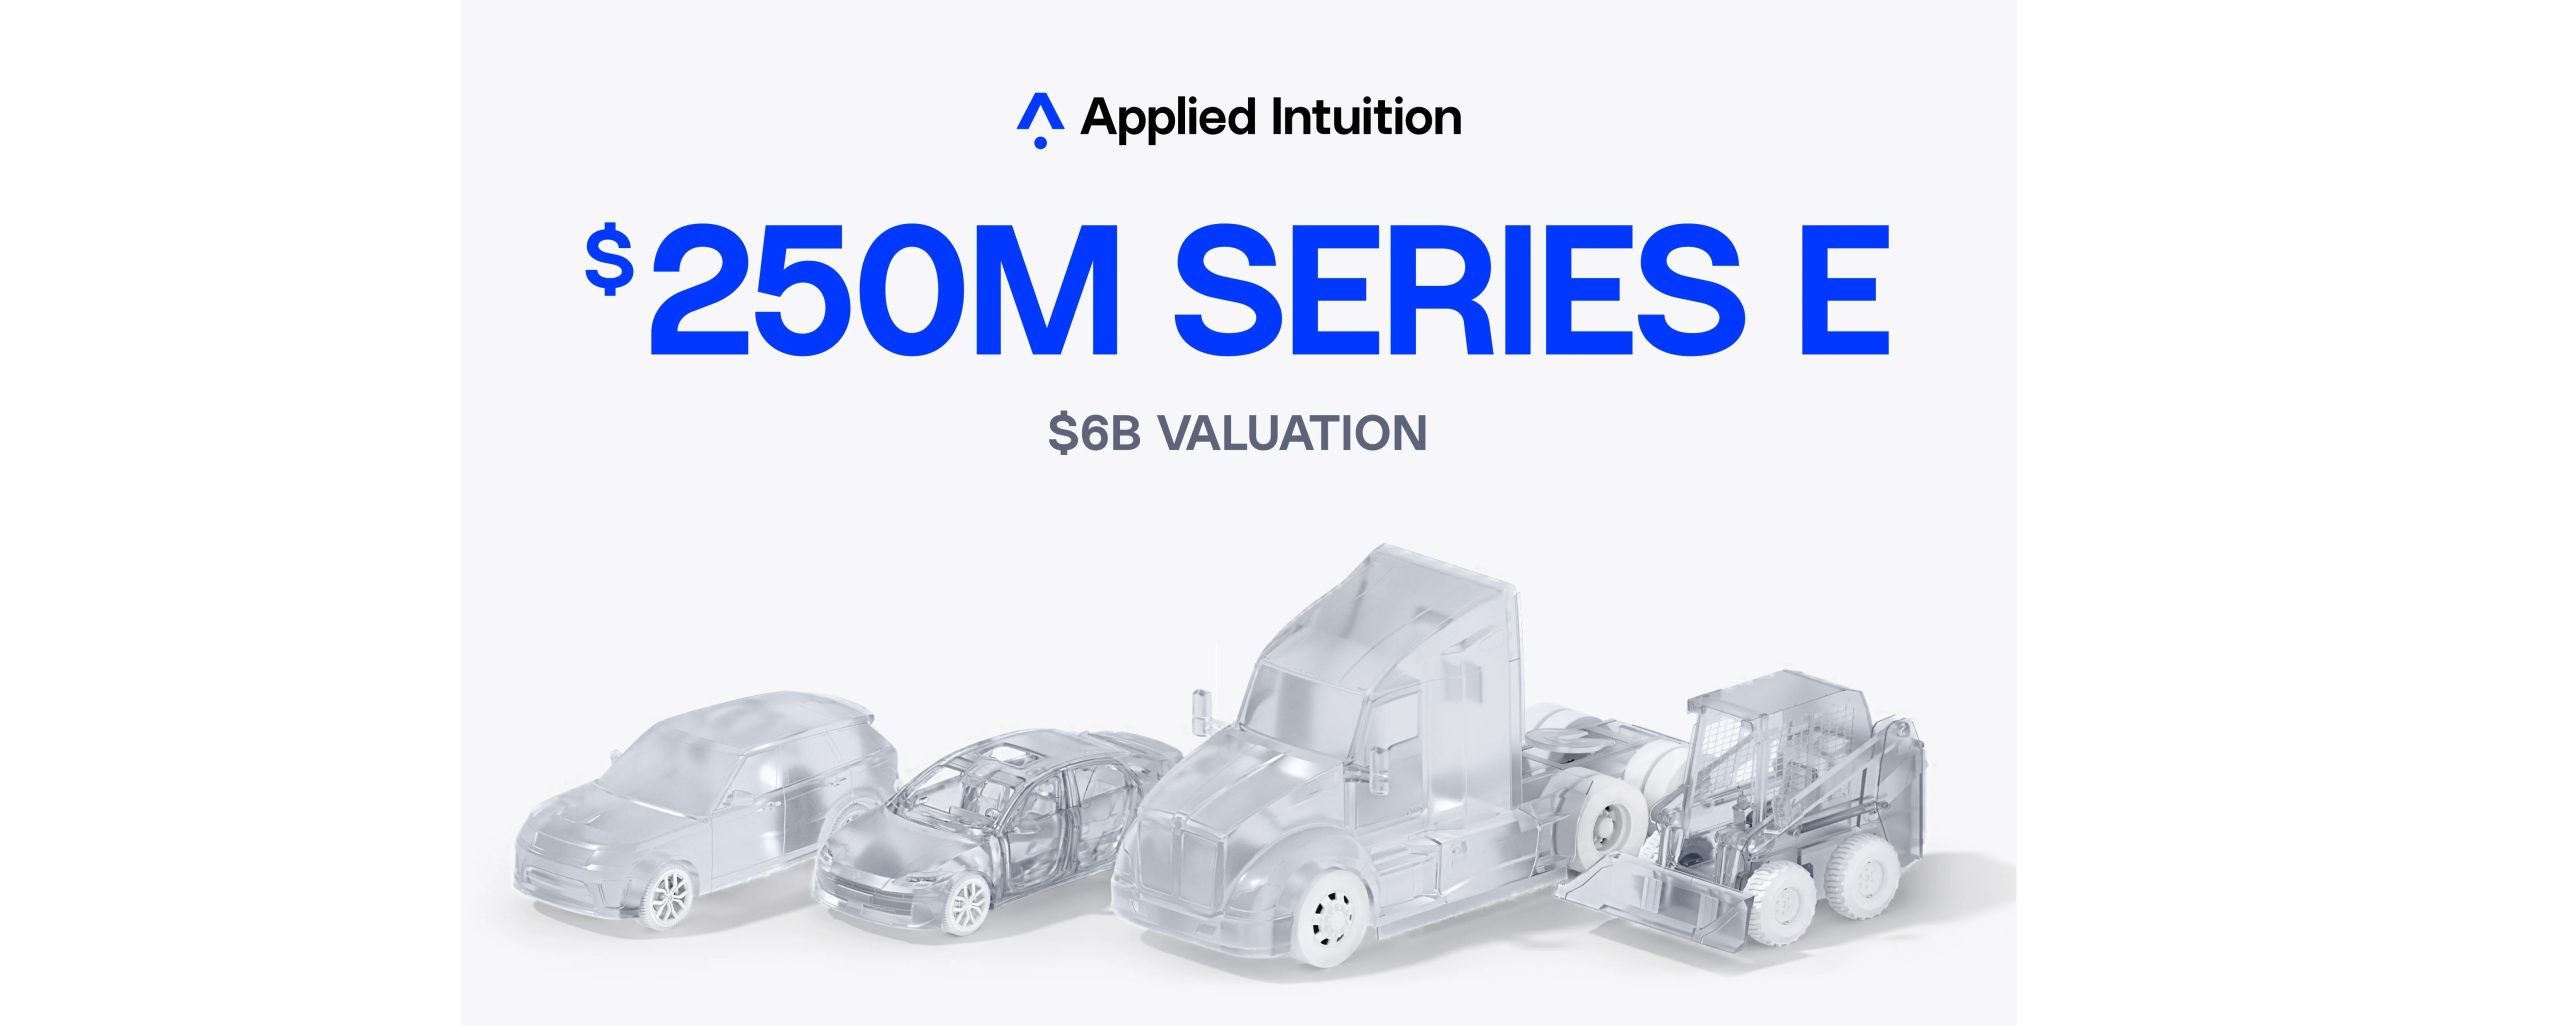 Applied Intuition raises $250M, valuation hits $6B